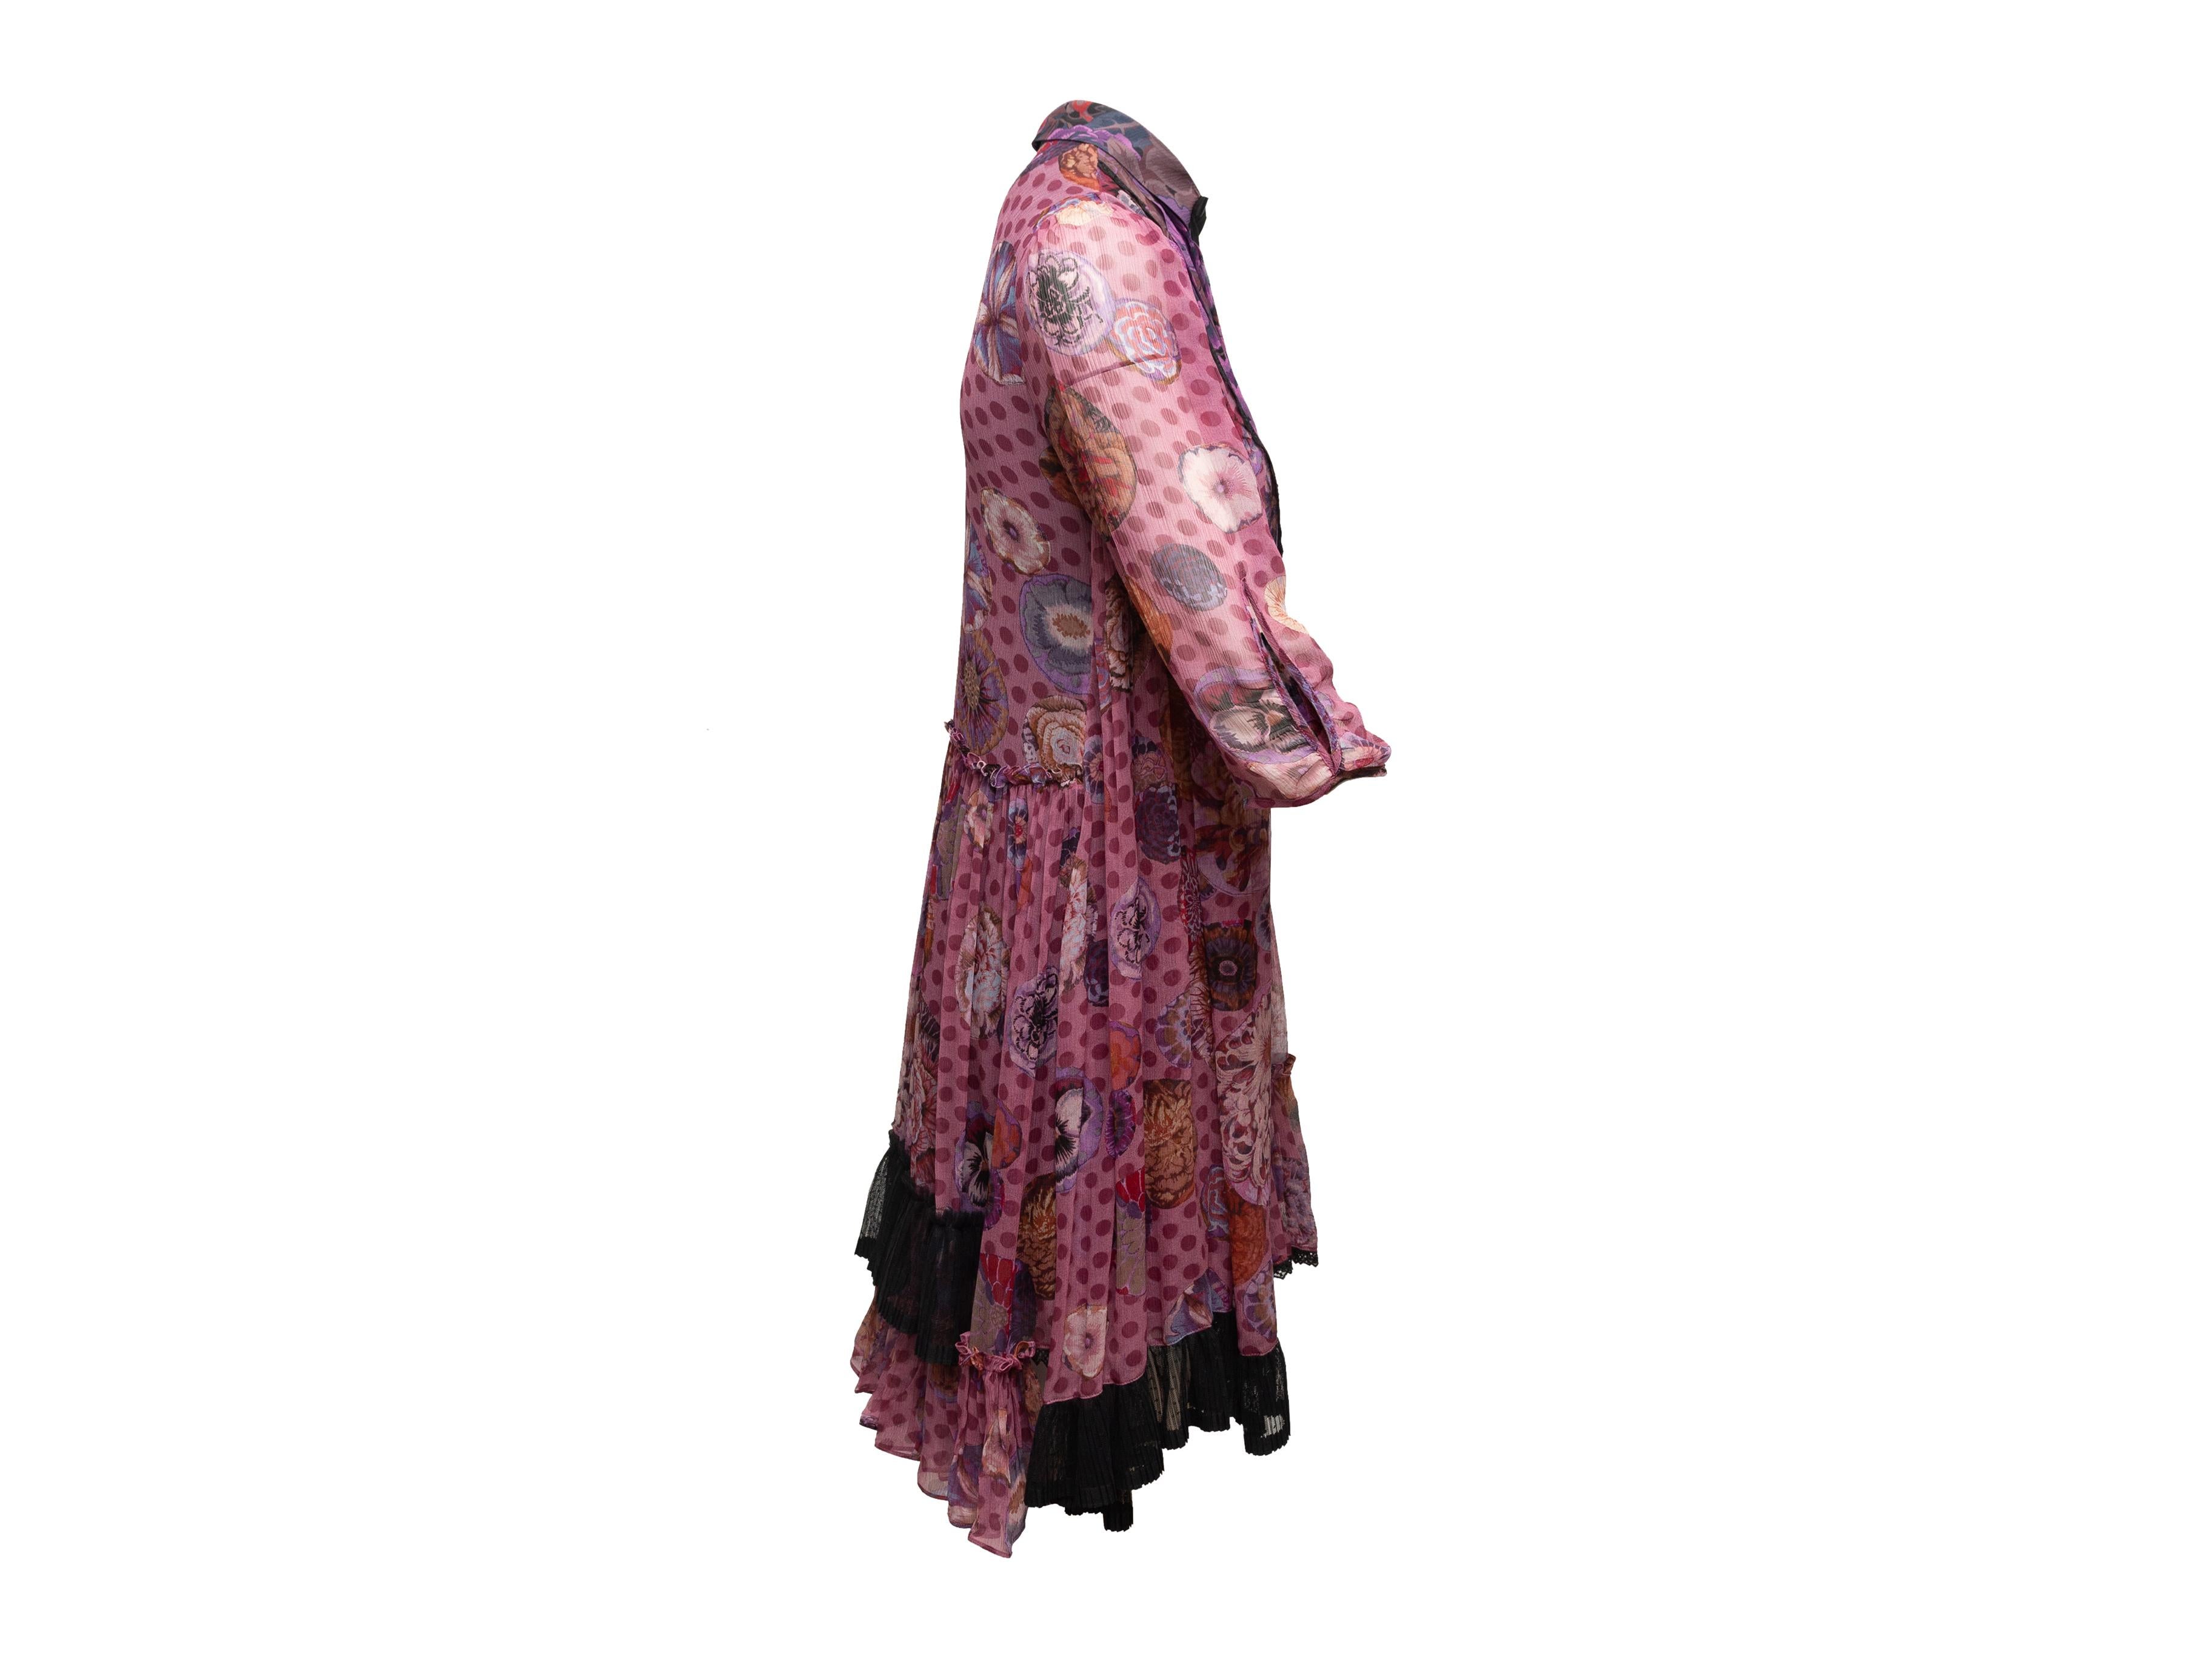 Product details: Purple and multicolor silk long sleeve dress by Coach. Floral polka dot print throughout. Tie accent at neck. Pleating at bust and skirt. Asymmetrical hem. Button closures at front. 32